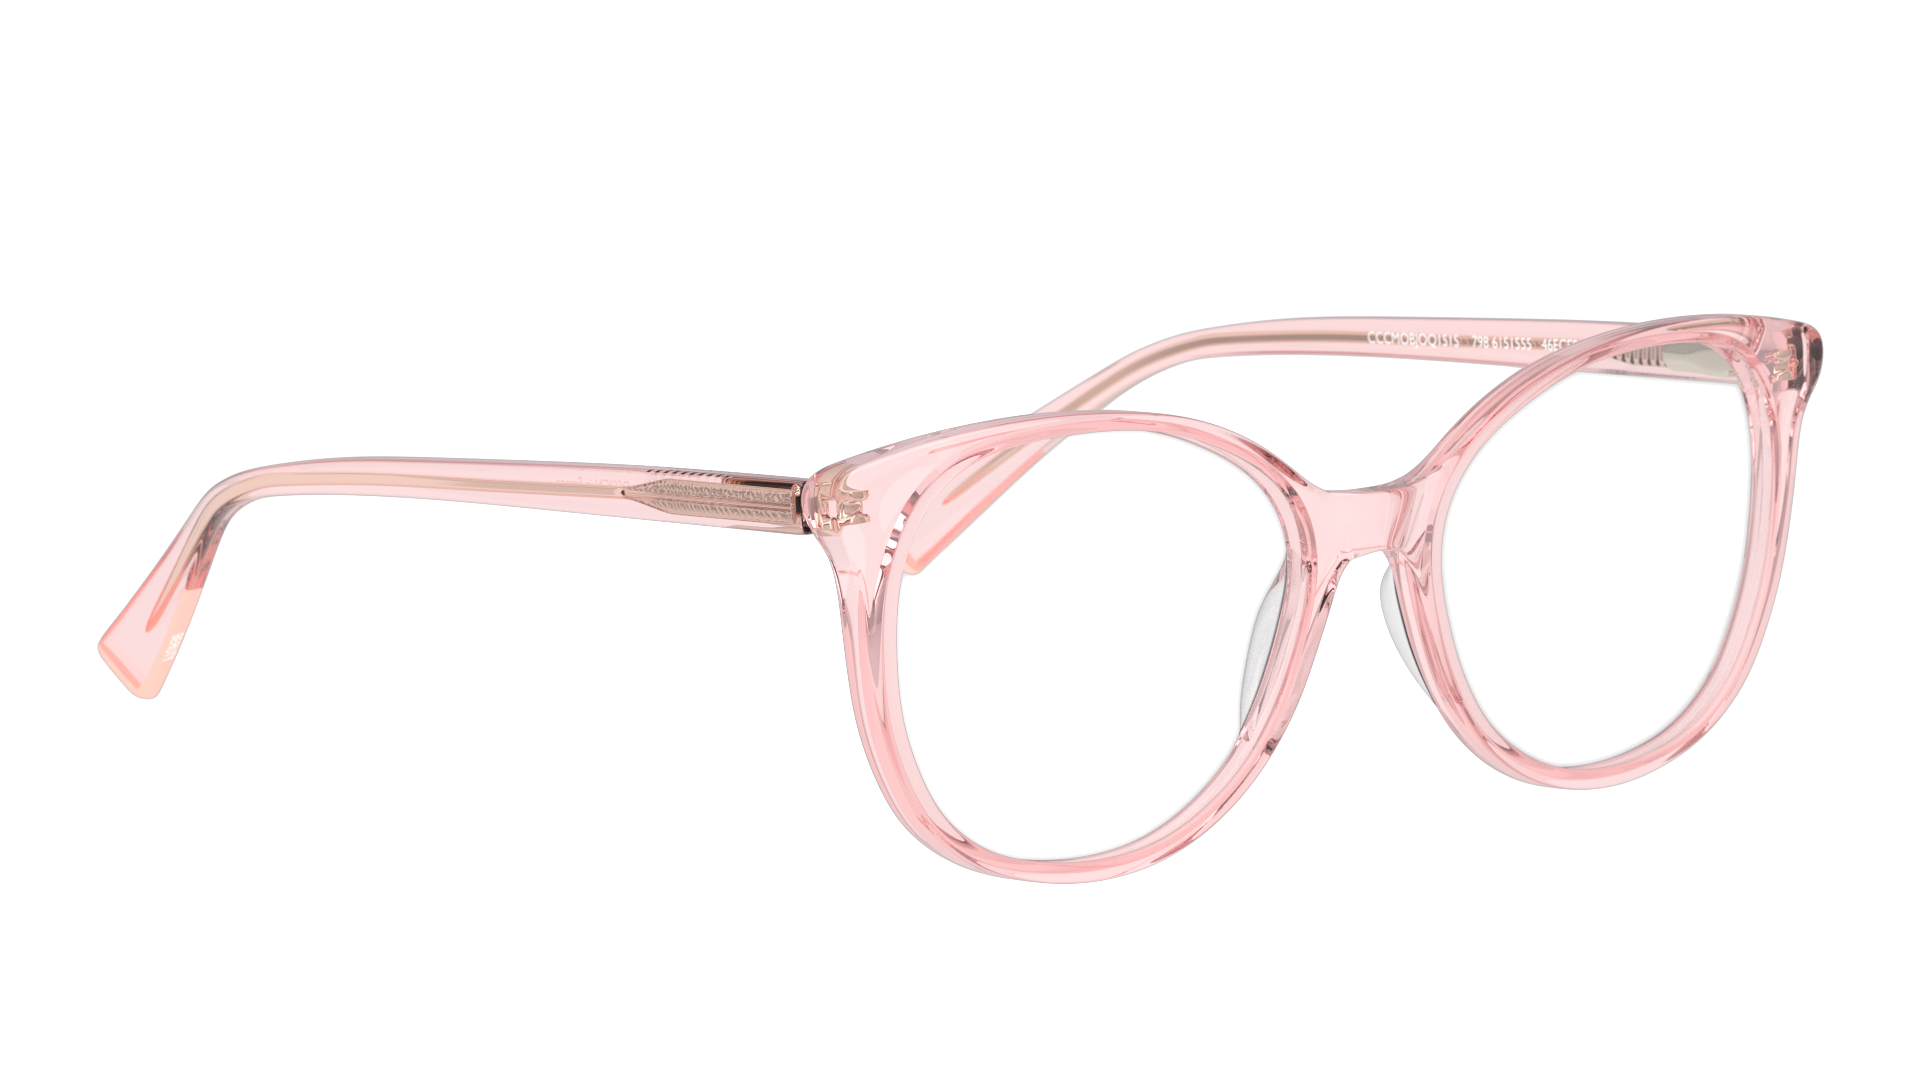 Angle_Right01 Unofficial UNOF0002 Glasses Transparent / Pink